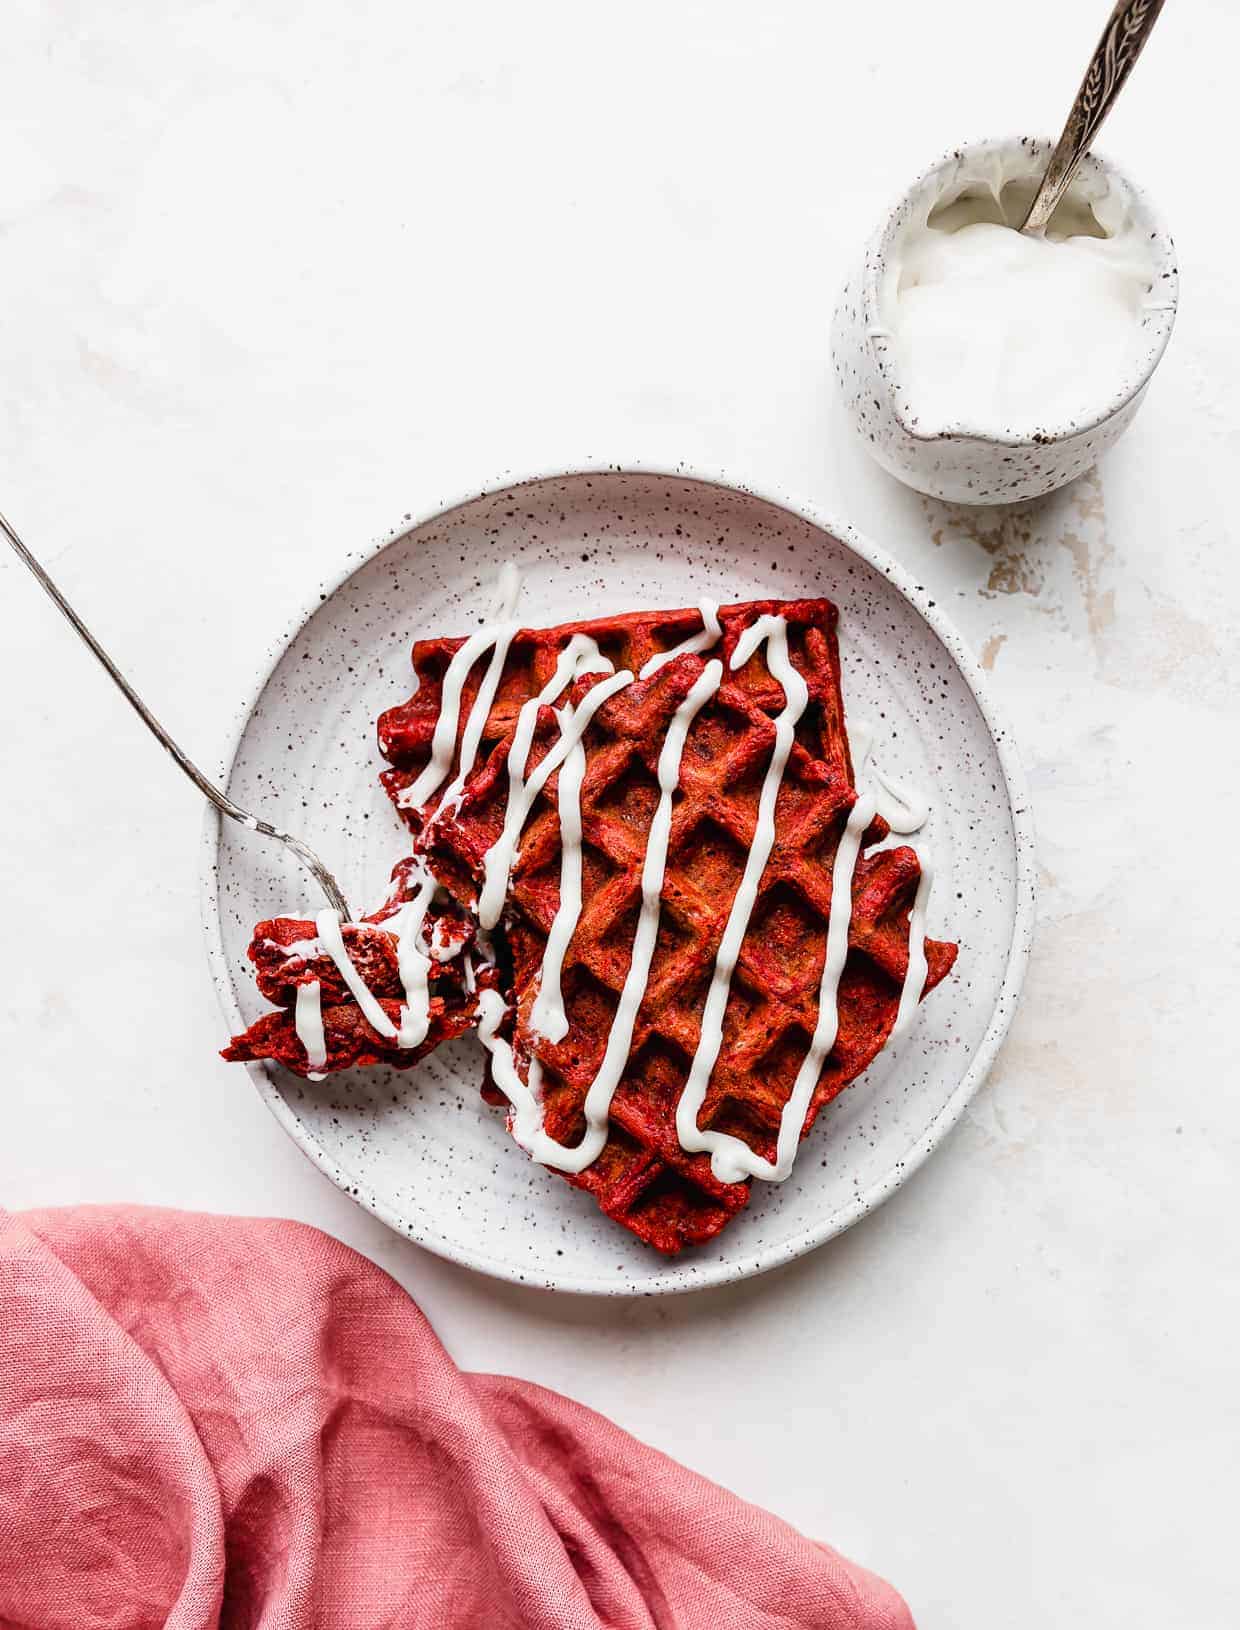 Red velvet waffles drizzled in a white cream cheese glaze against a white background.